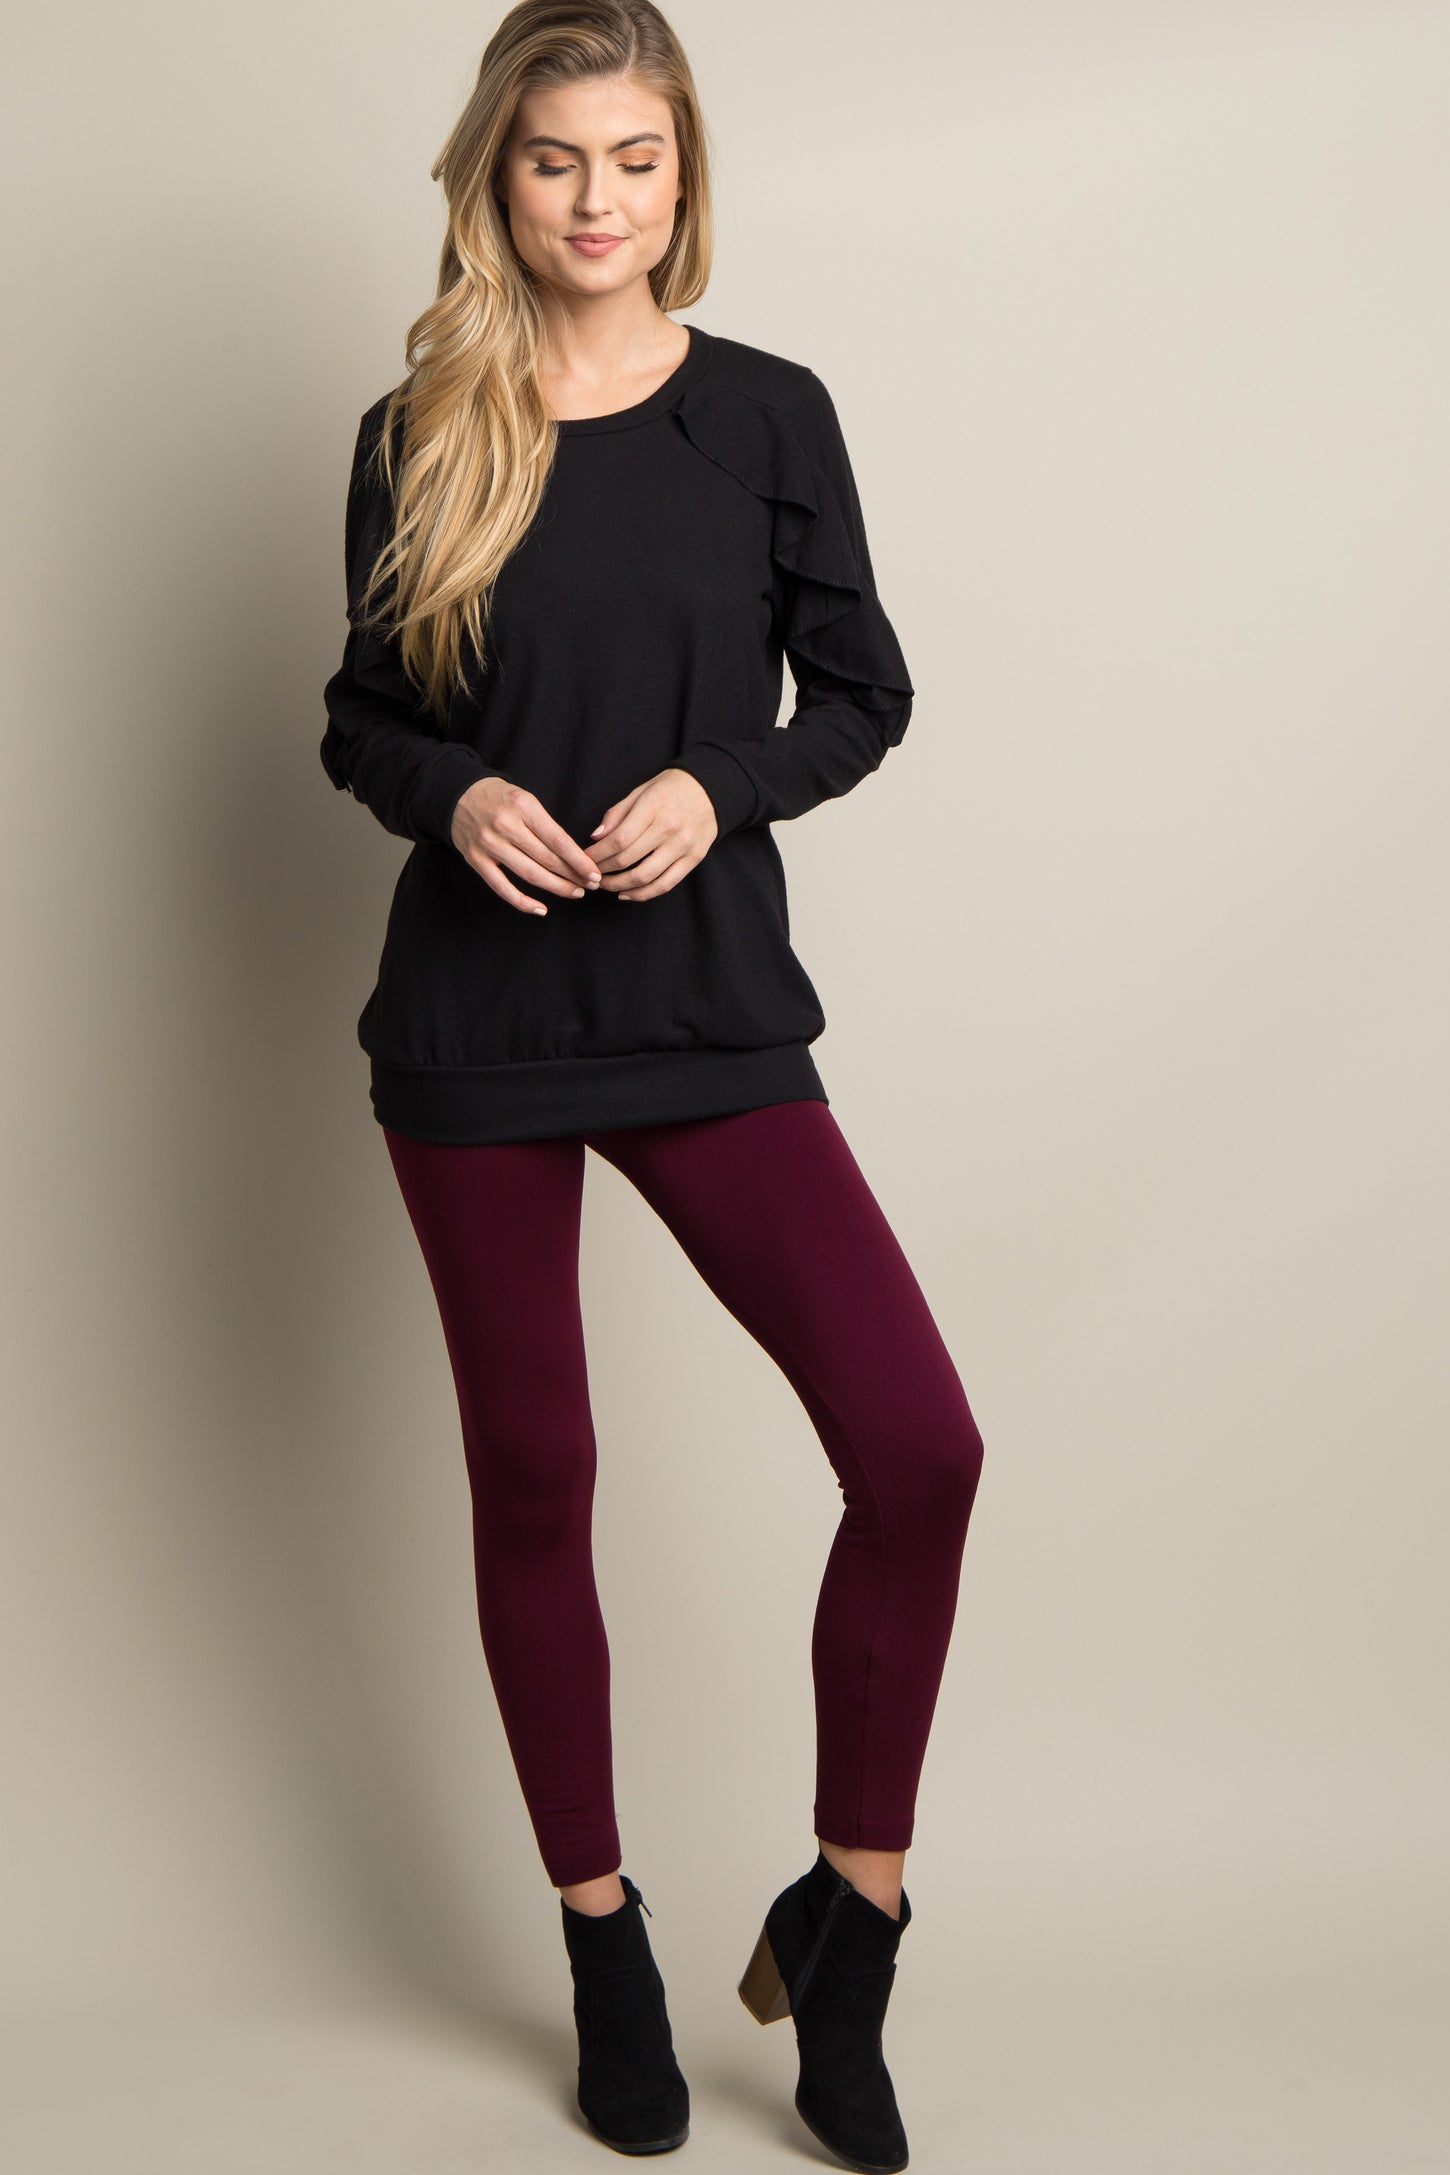 Conceited Fleece Lined Leggings for Women - LFL Magenta Pink - Small/Medium